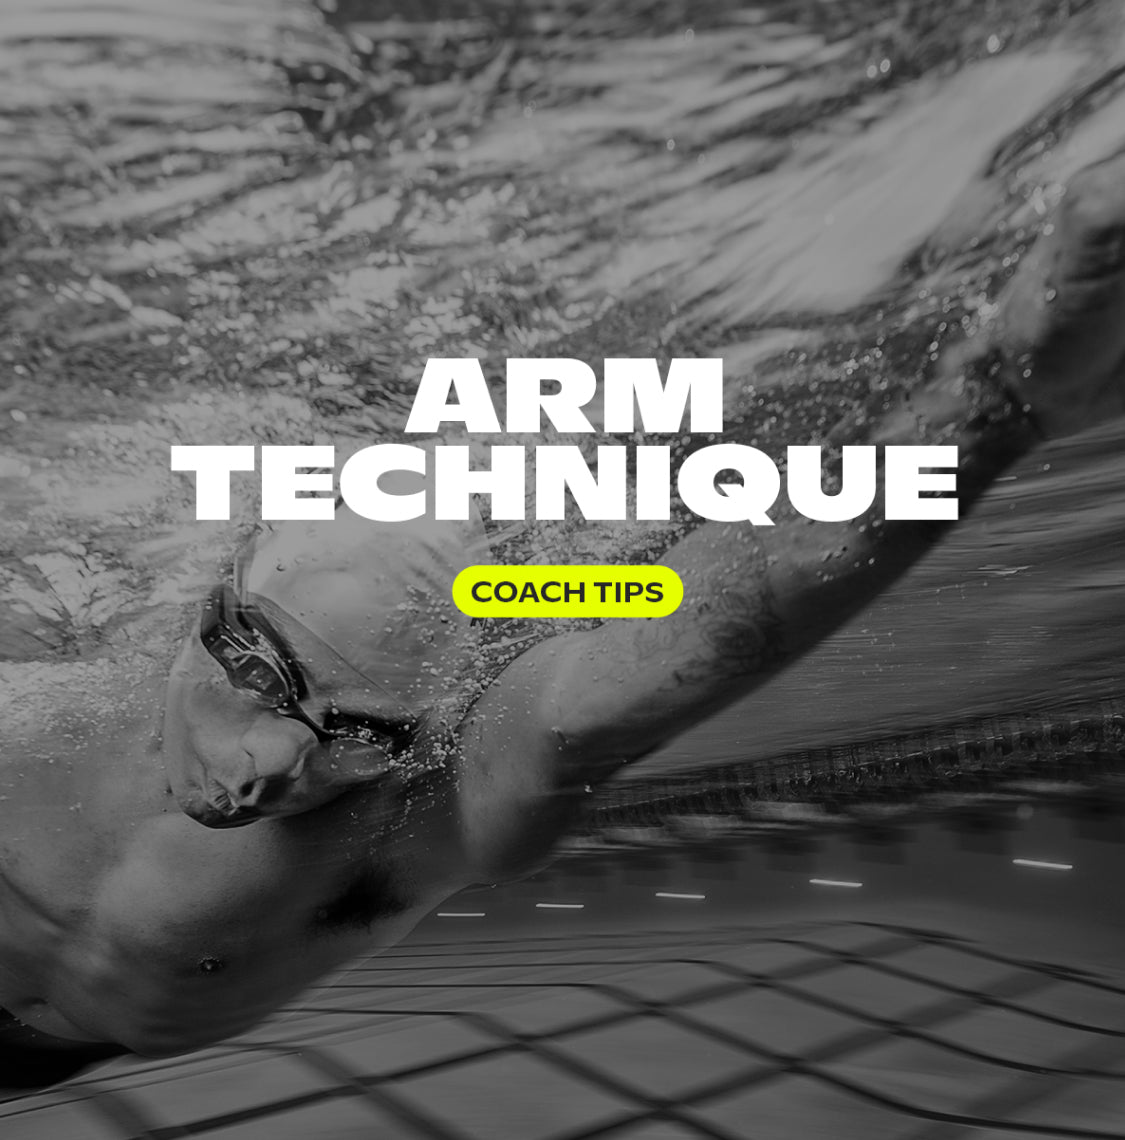 Coach Tips: Essential Swimming Dos and Don'ts for Improved Arm Technique